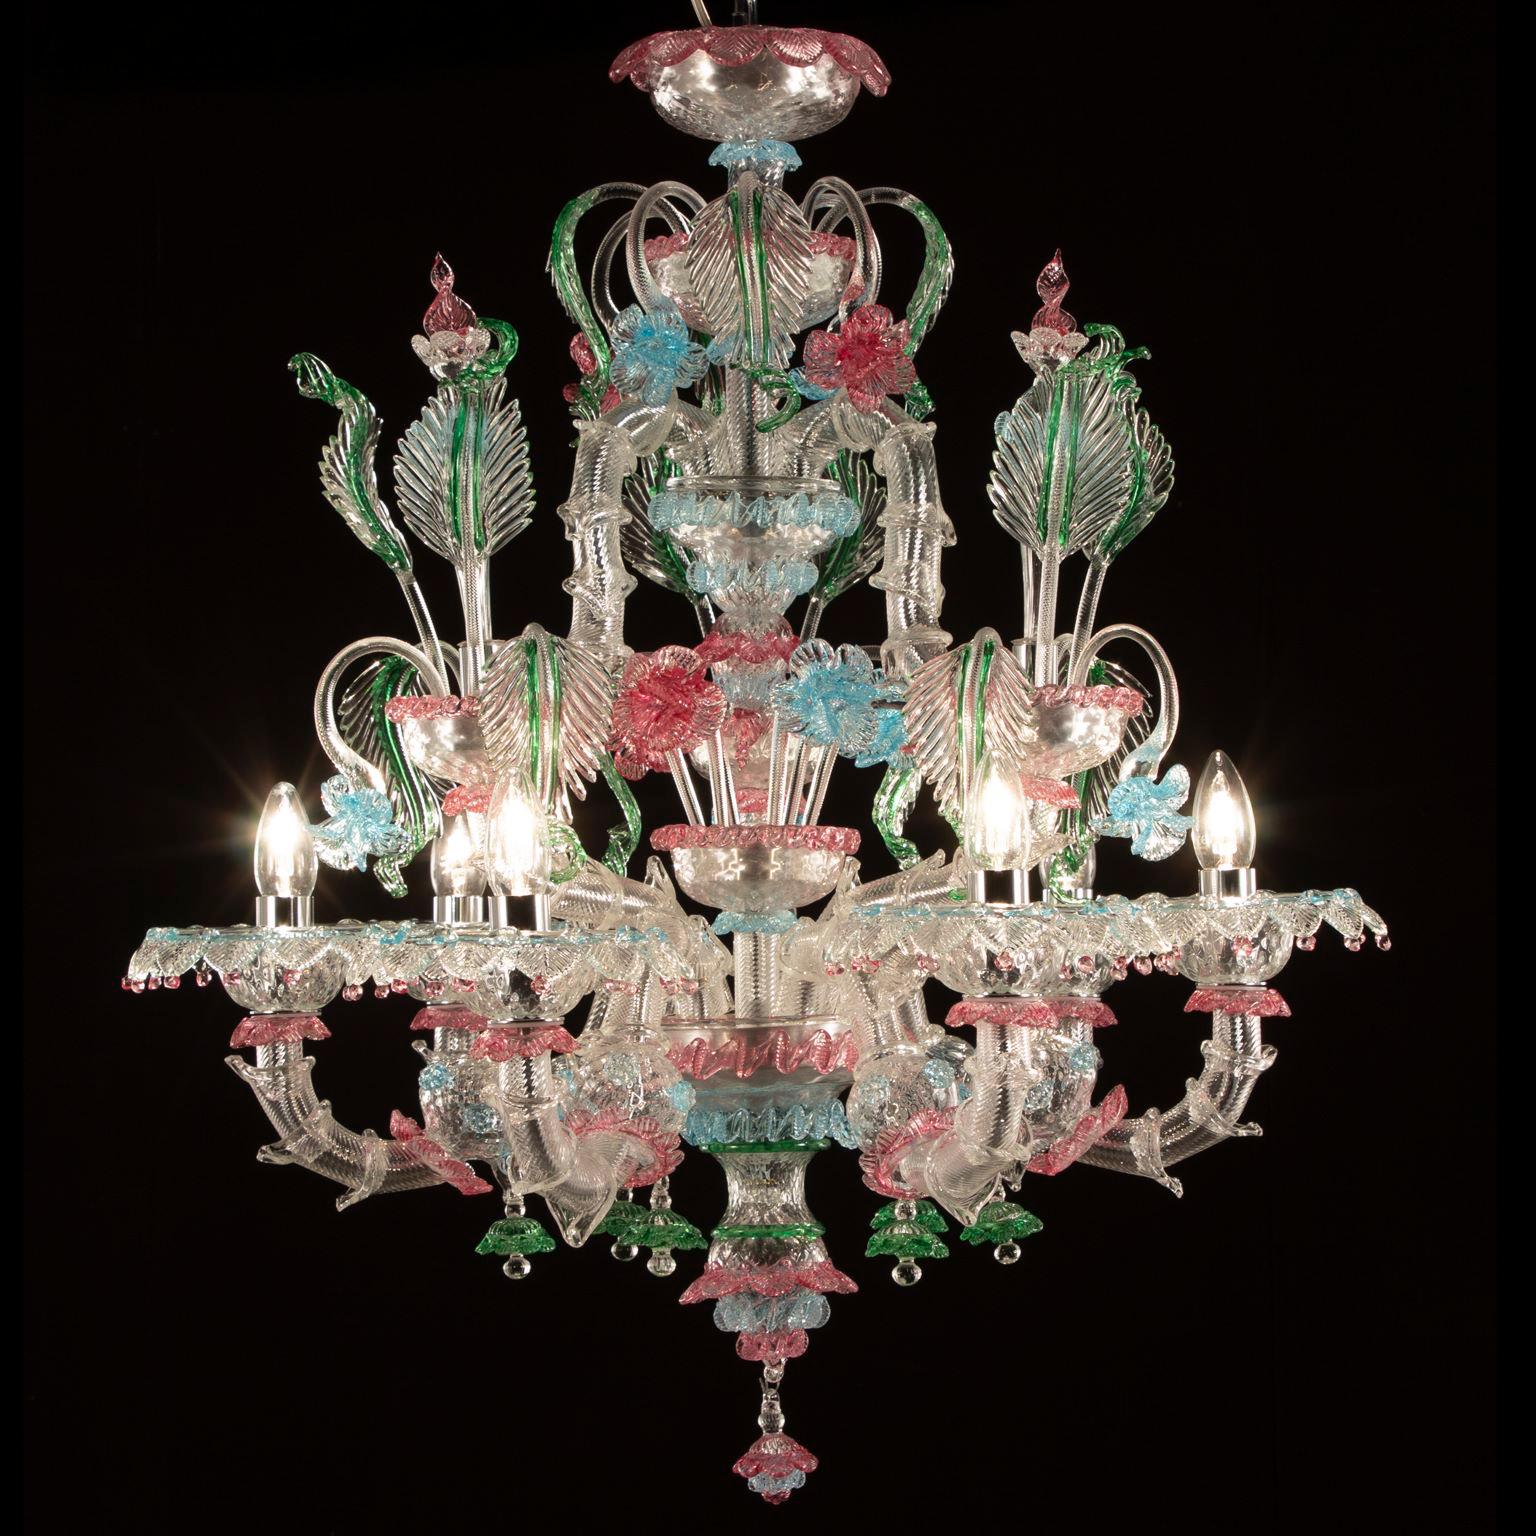 This rezzonico chandelier 6 lights in clear Murano glass with colorful details by Multiforme is completely handmade.
It is the combination of the traditional Venetian structure with gaudy colors. A peculiar lighting works, lively and exuberant: we